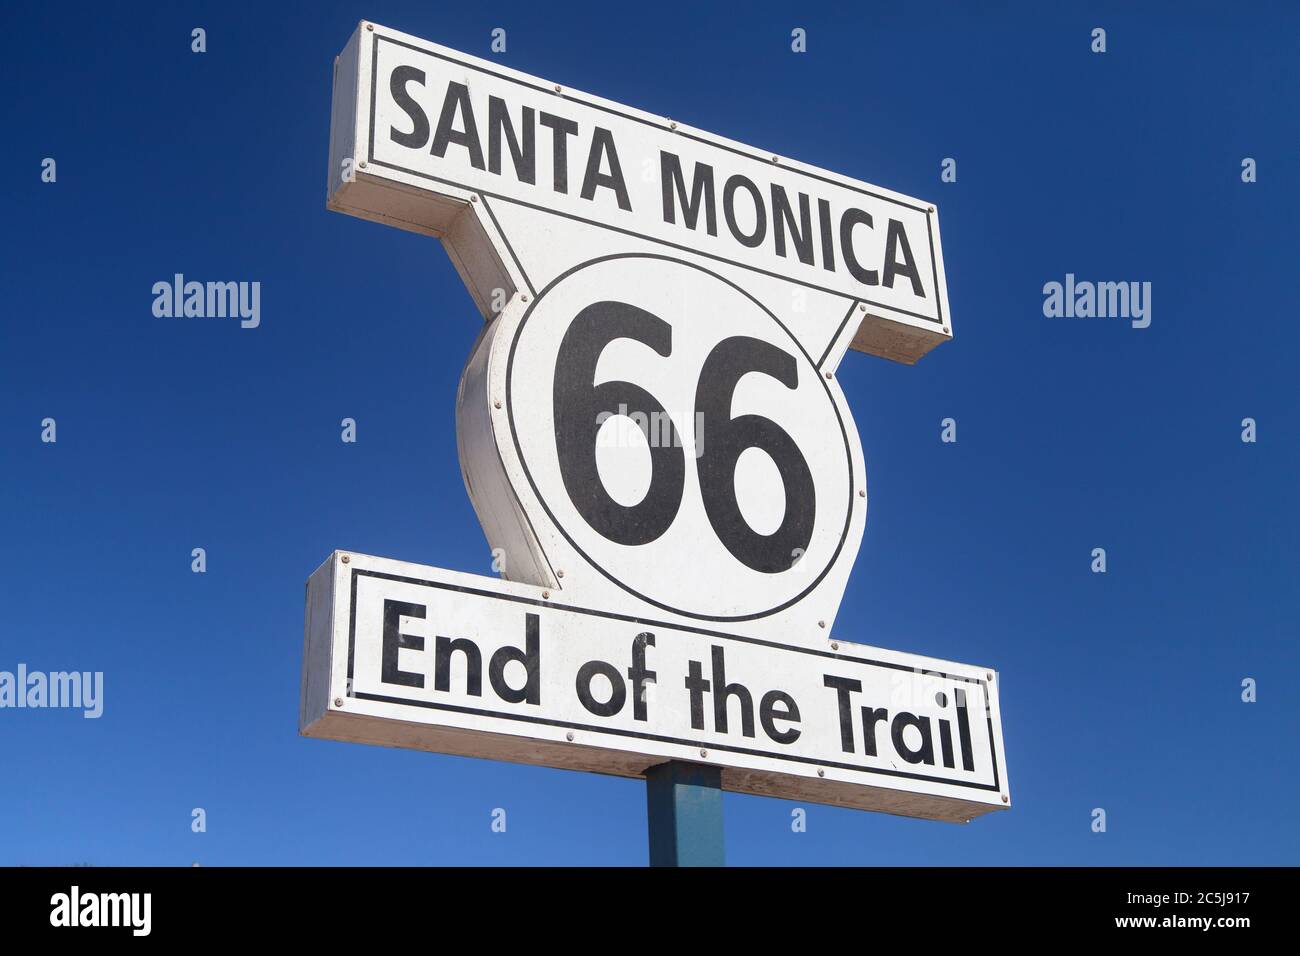 Route 66 End of Trail Sign in Santa Monica, Los Angeles, United States. Stock Photo